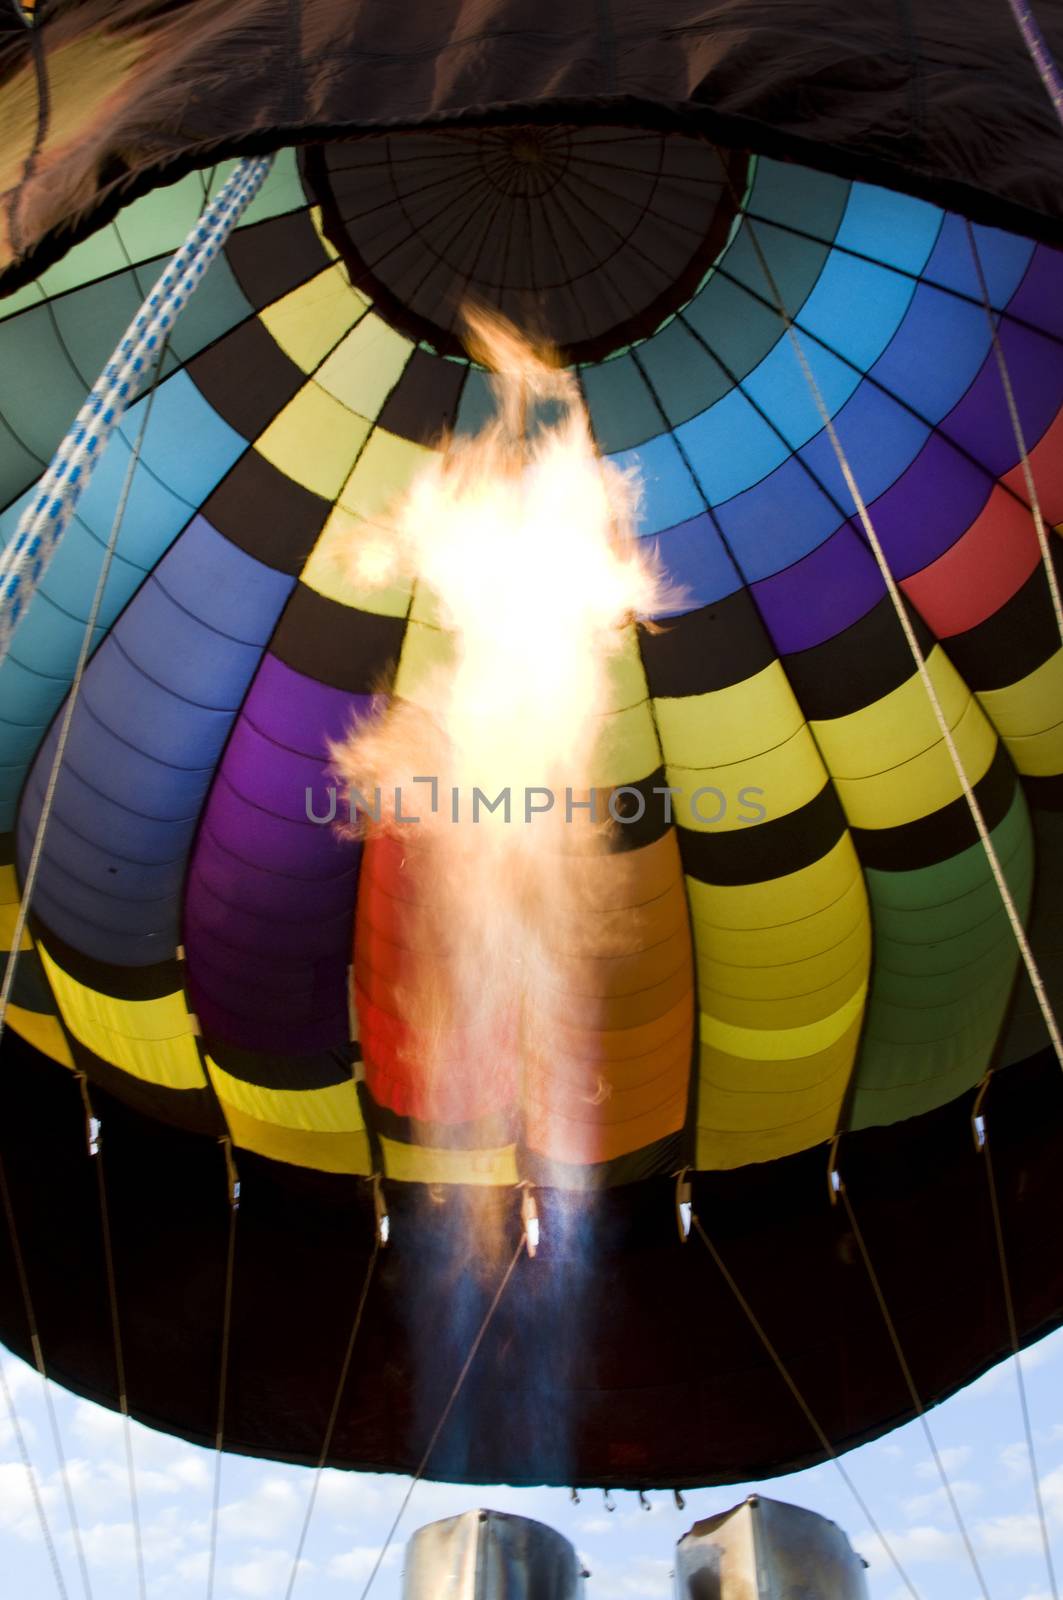 Flames from a burner inside a hot-air balloon envelop. This is how a balloon acheives lift